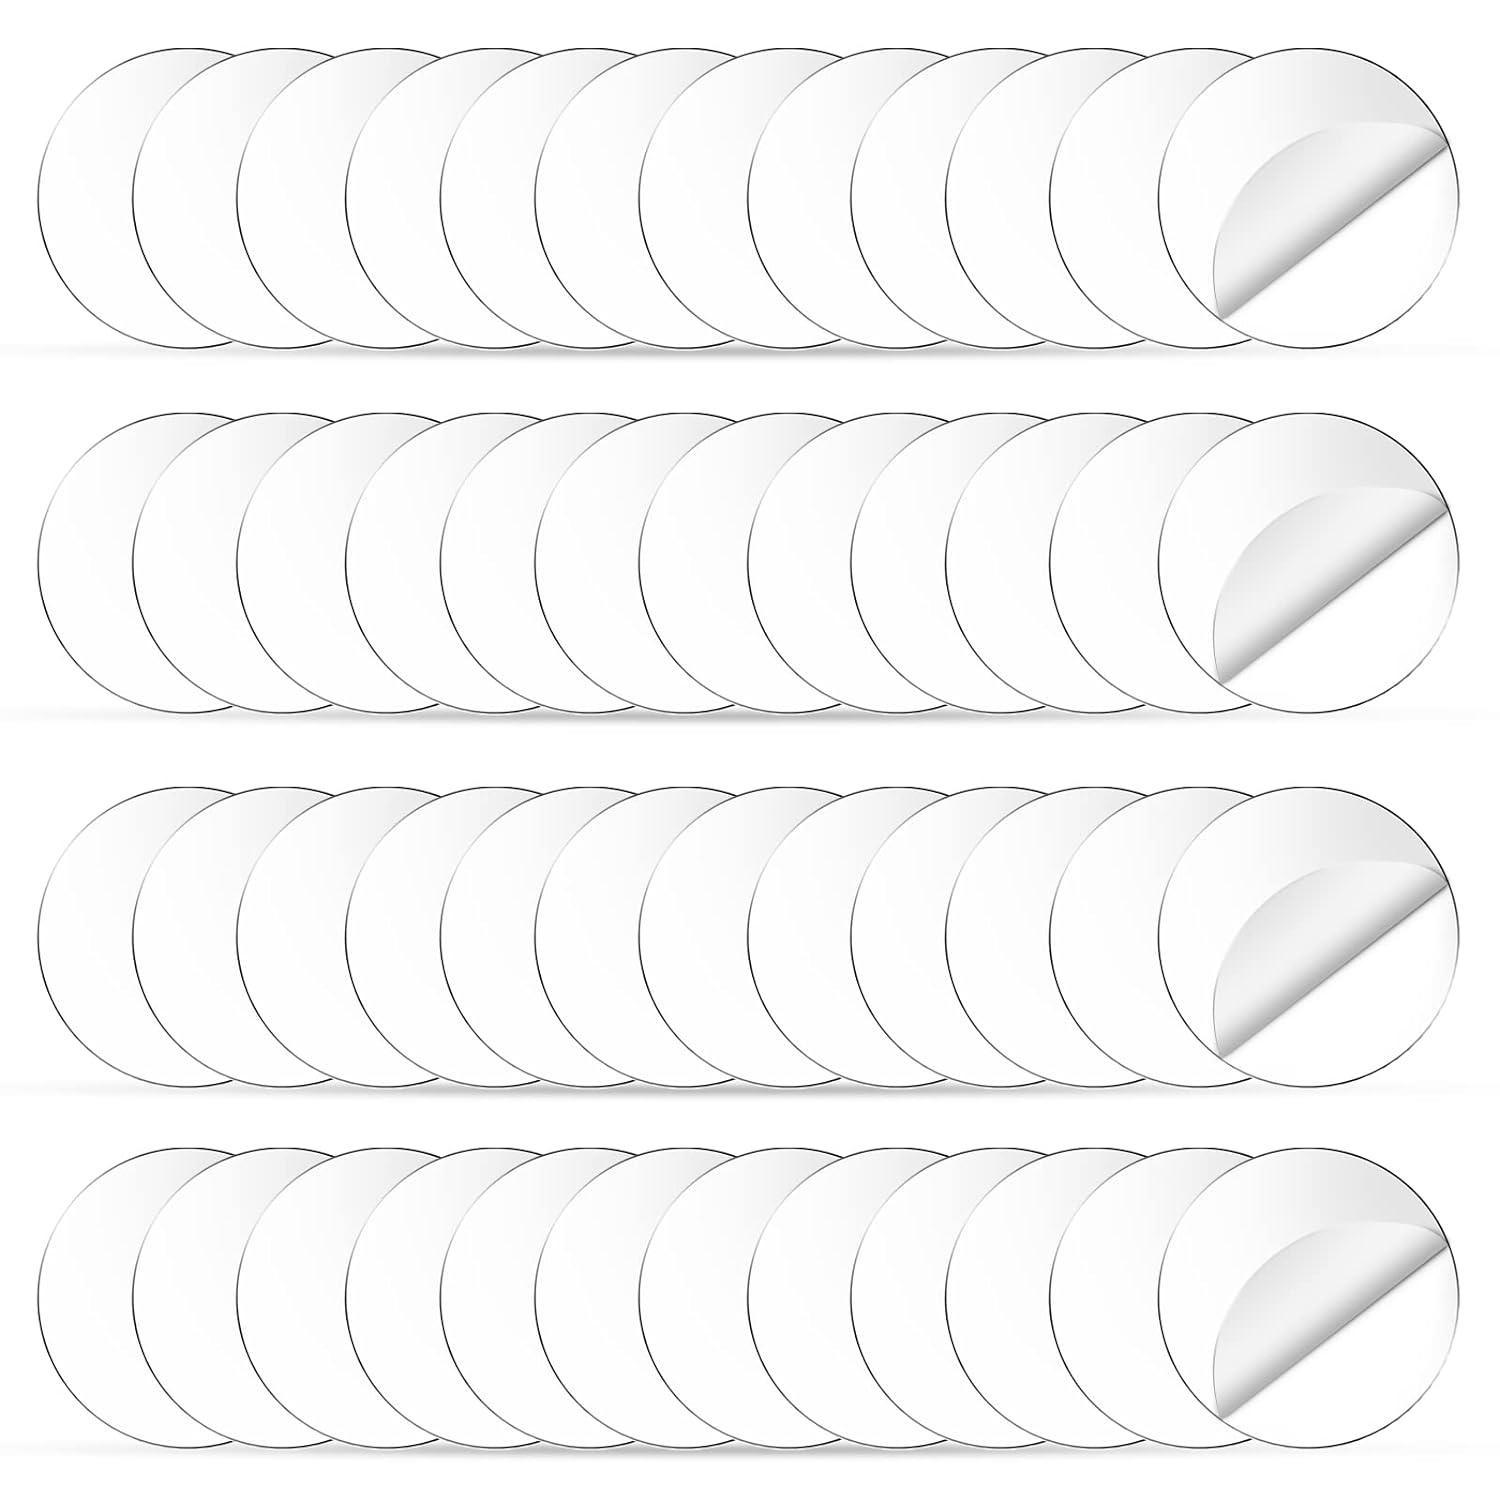 30 Pieces Clear Acrylic Circle Discs Thick Round Acrylic Blanks Acrylic  Sheets Acrylic Disc Ornaments for DIY Projects and Crafts (6 Inch)